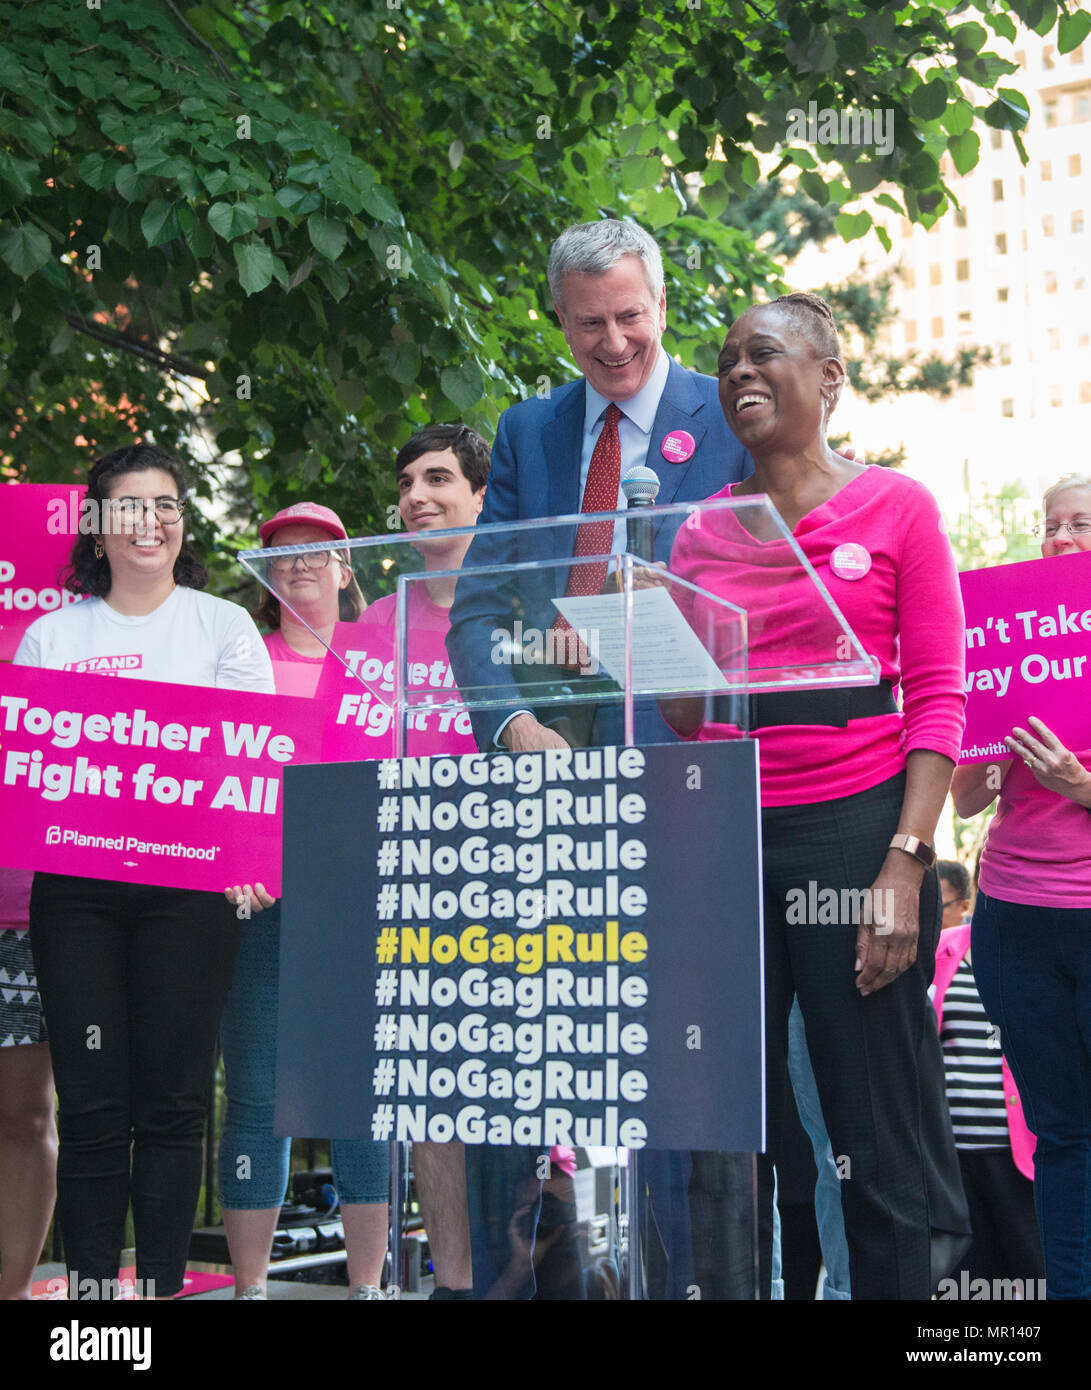 New York, USA. 24th May 2018. First Lady of New York City Chirlane McCray (with husband Mayor Bill DeBlasio in background) speaks at Title X (Title Ten) gag rule rally in New York City, hosted by Planned Parenthood of New York City on May 24th 2018, reacting the President Trump's attempt to ban Medicaid and federal funding to medical providers who provide full, legal medical information to patients wanting or needing abortion services. Credit: Brigette Supernova/Alamy Live News Stock Photo